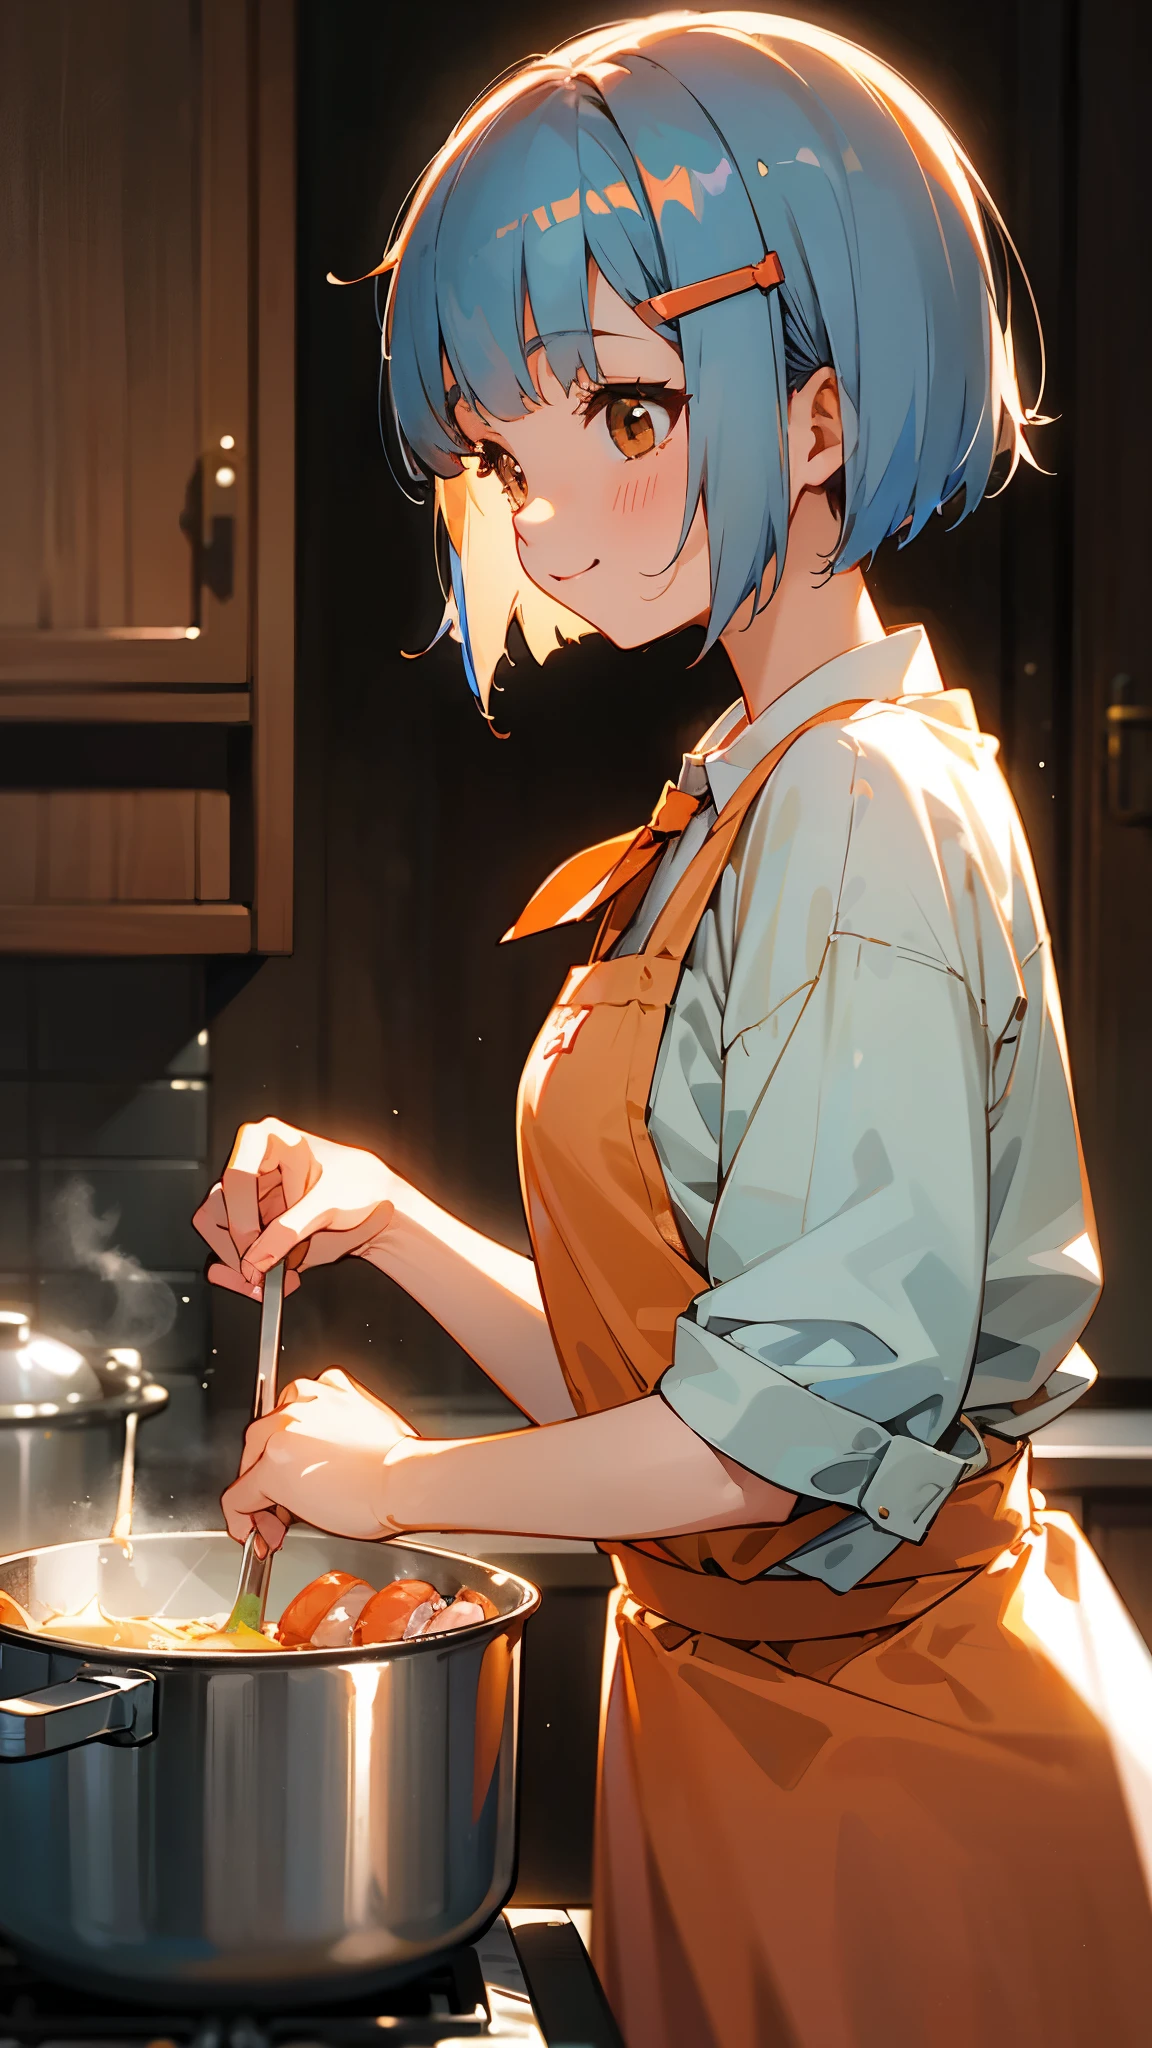 1 girl、anime picture、kitchen、Cute woman cooking delicious food、shrimp、Glossy light blue hair、short bob hairstyle、Tie your hair with an orange hair clip、Beautiful brown eyes、smile、From the side、sharp outline、background bokeh、written boundary depth